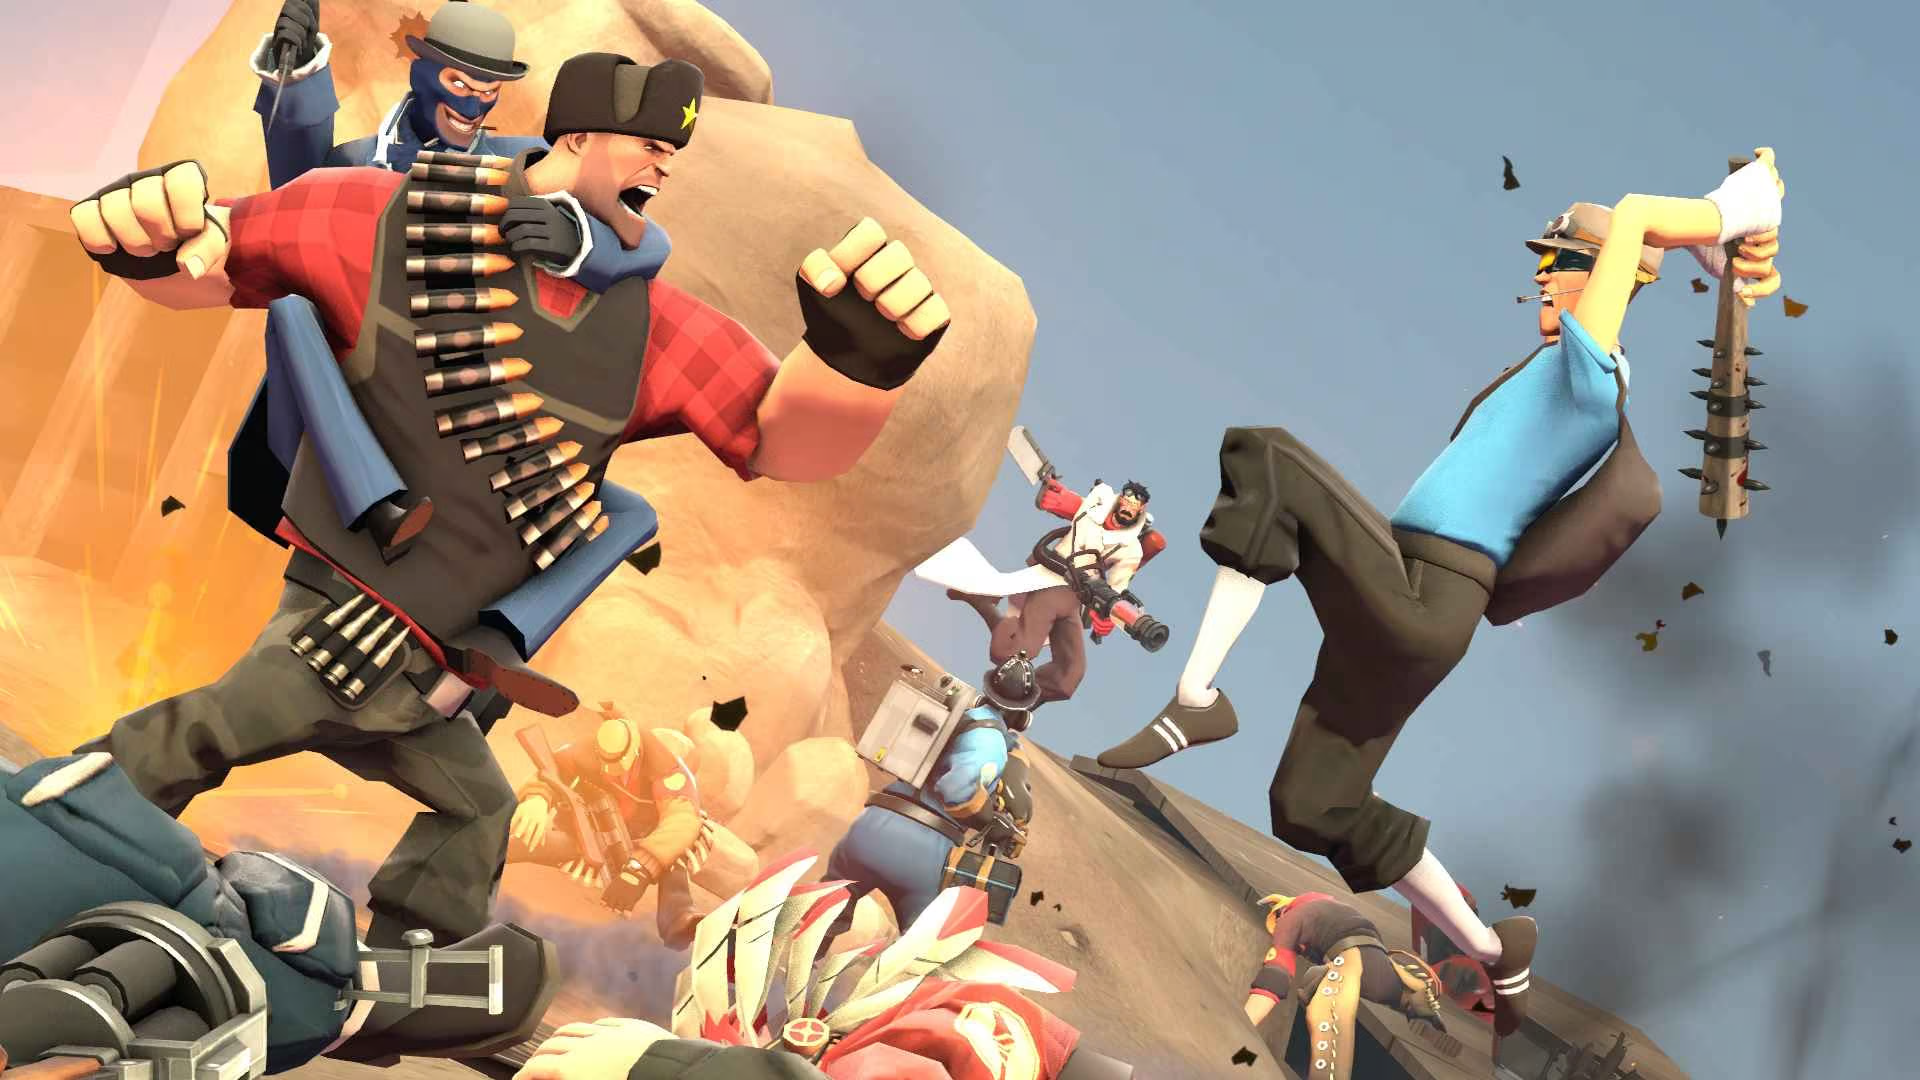 2007's Team Fortress 2 hits new record at 254K concurrent players